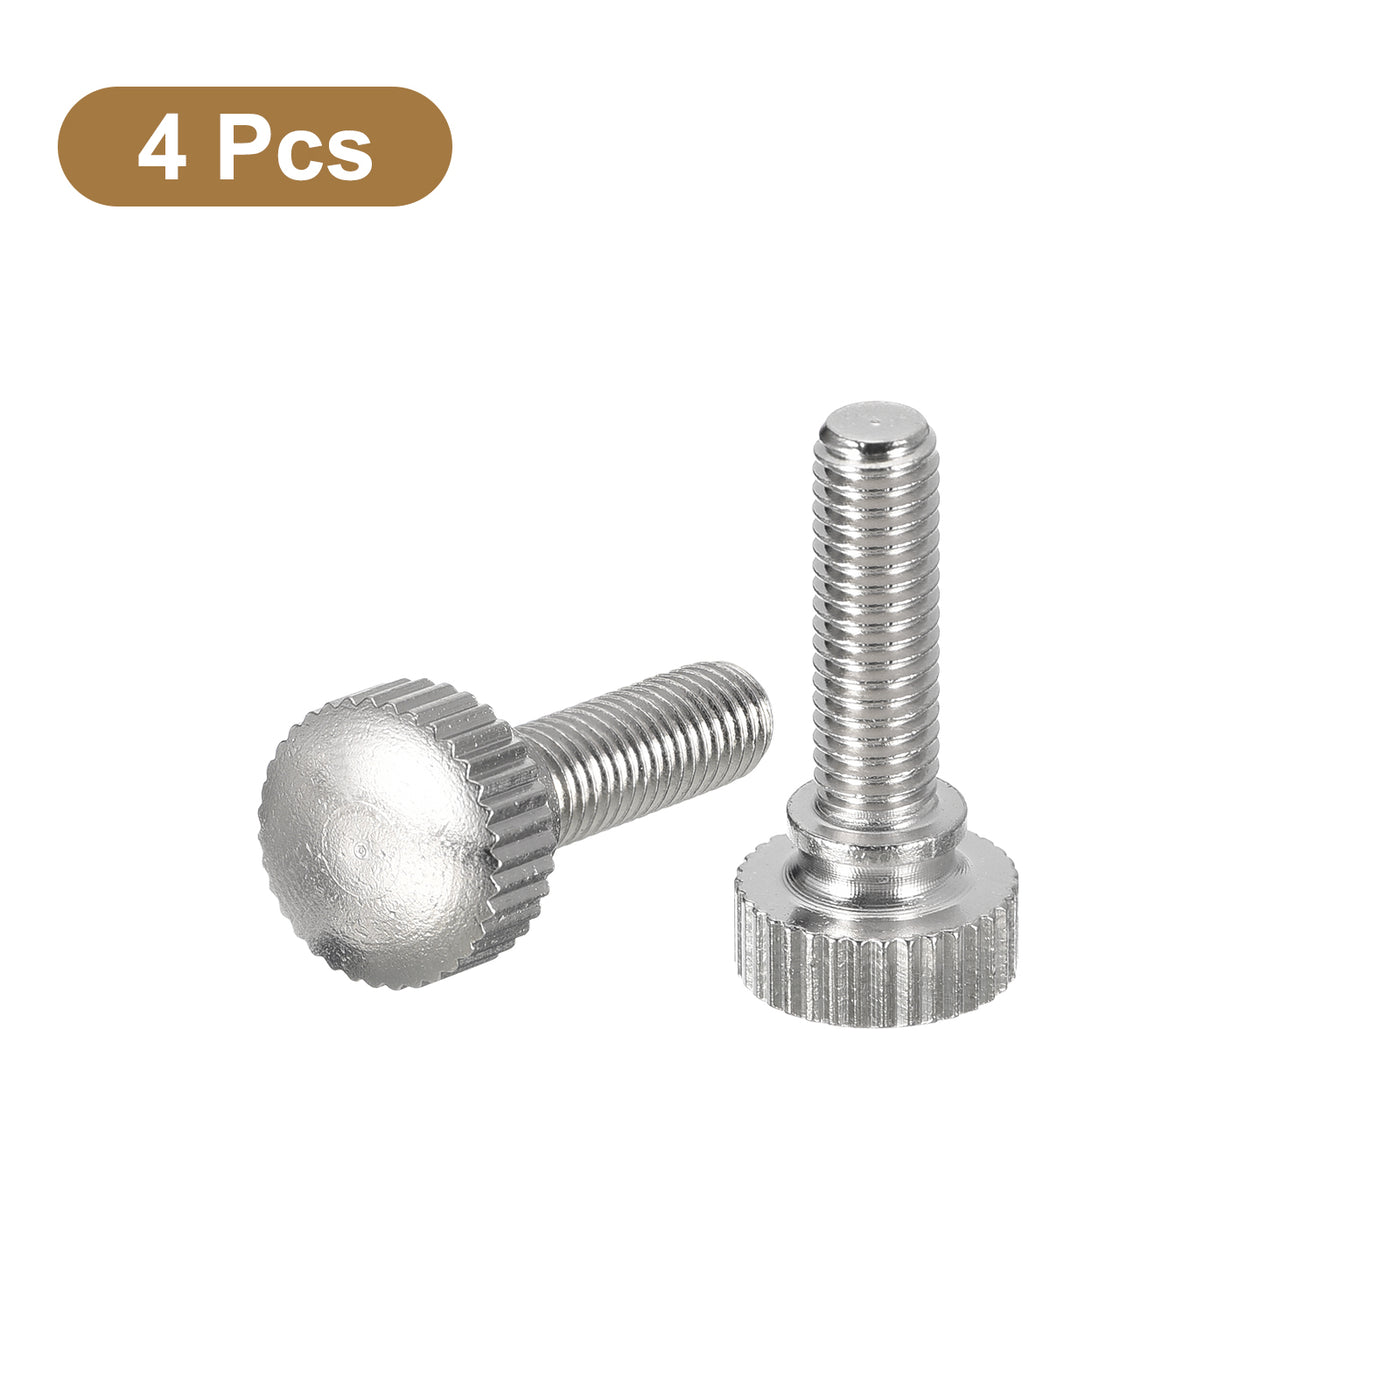 uxcell Uxcell M5x16mm Knurled Thumb Screws, 4pcs Brass Thumb Screws with Shoulder, Silver Tone